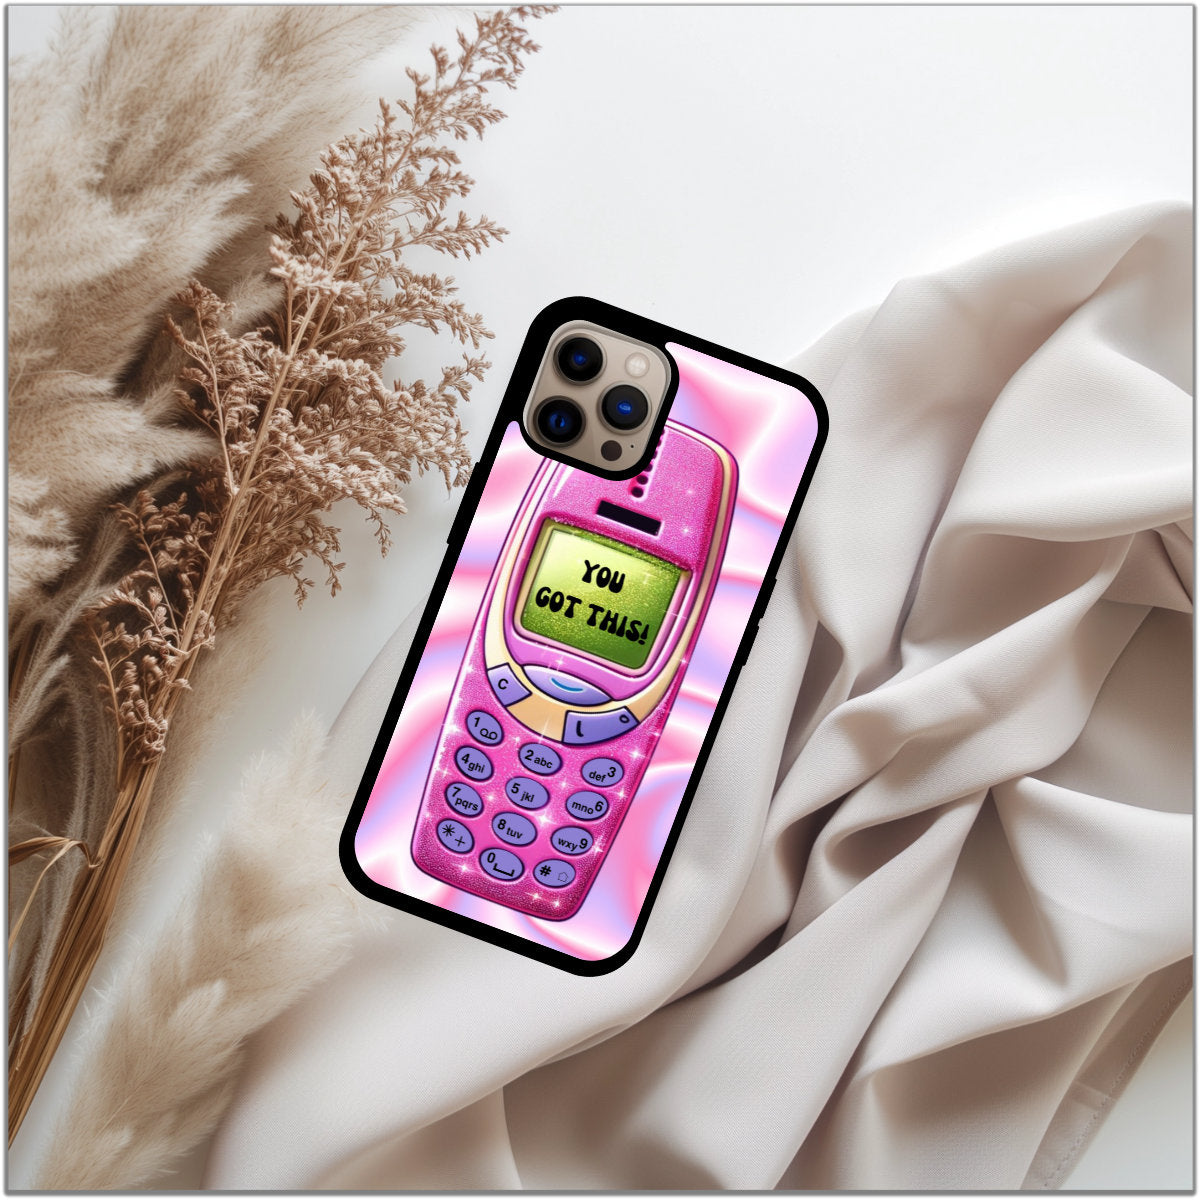 Retro Phone Case perfect gift for her - cute phone case - best birthday gift - iphone case - girly phone case - nokia phone case - Y2k